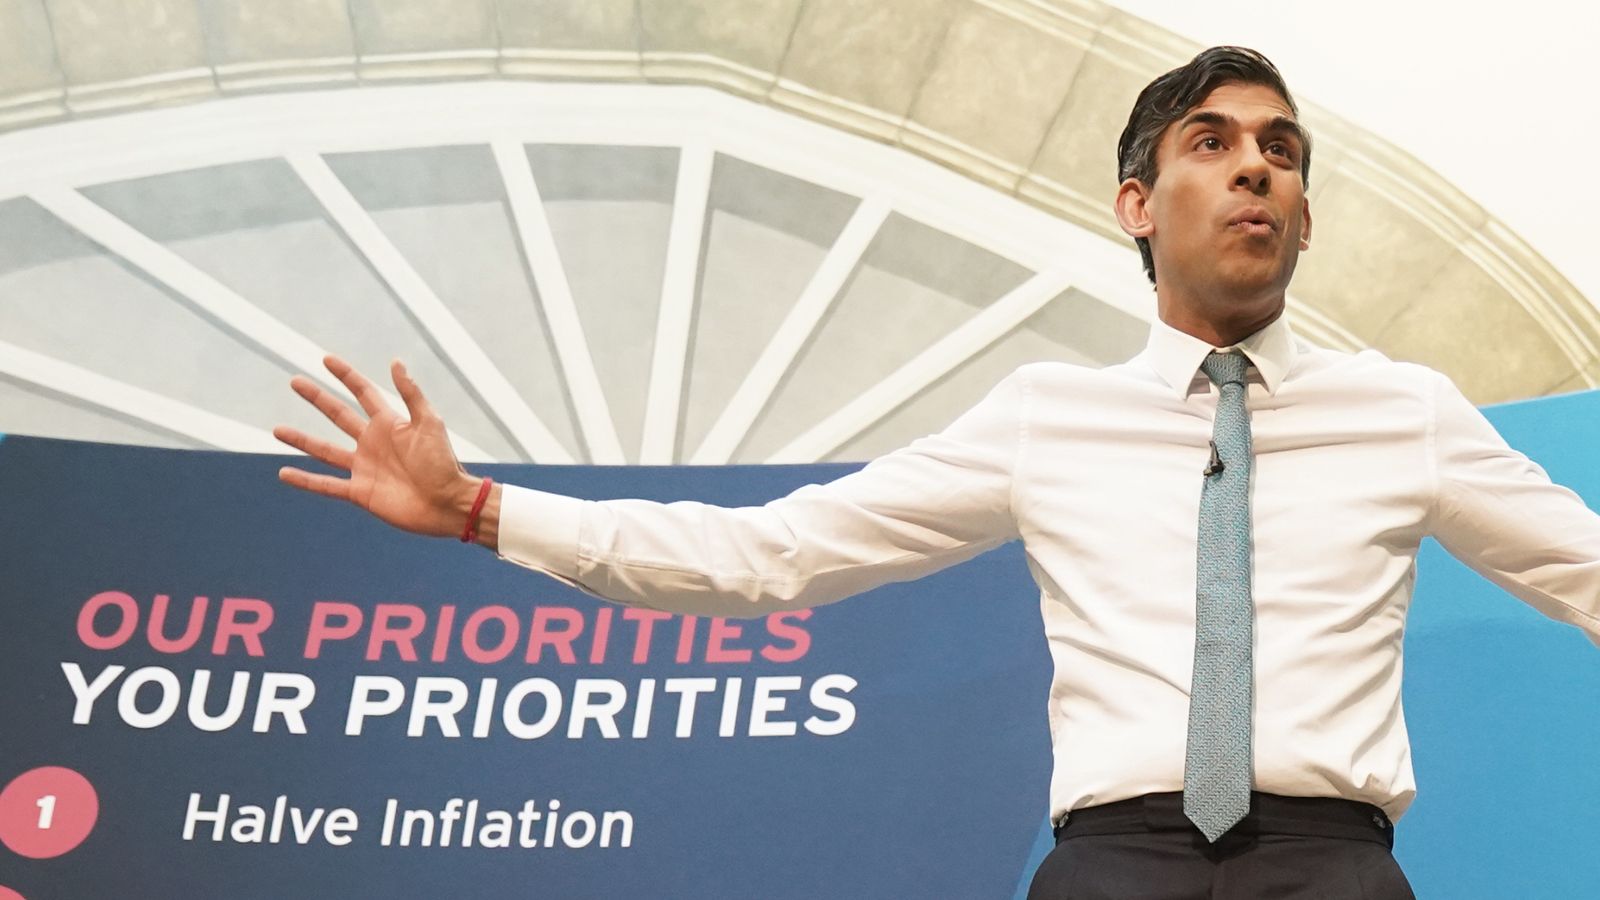 Inflation: Halving price growth 'hard but not impossible', says Rishi Sunak